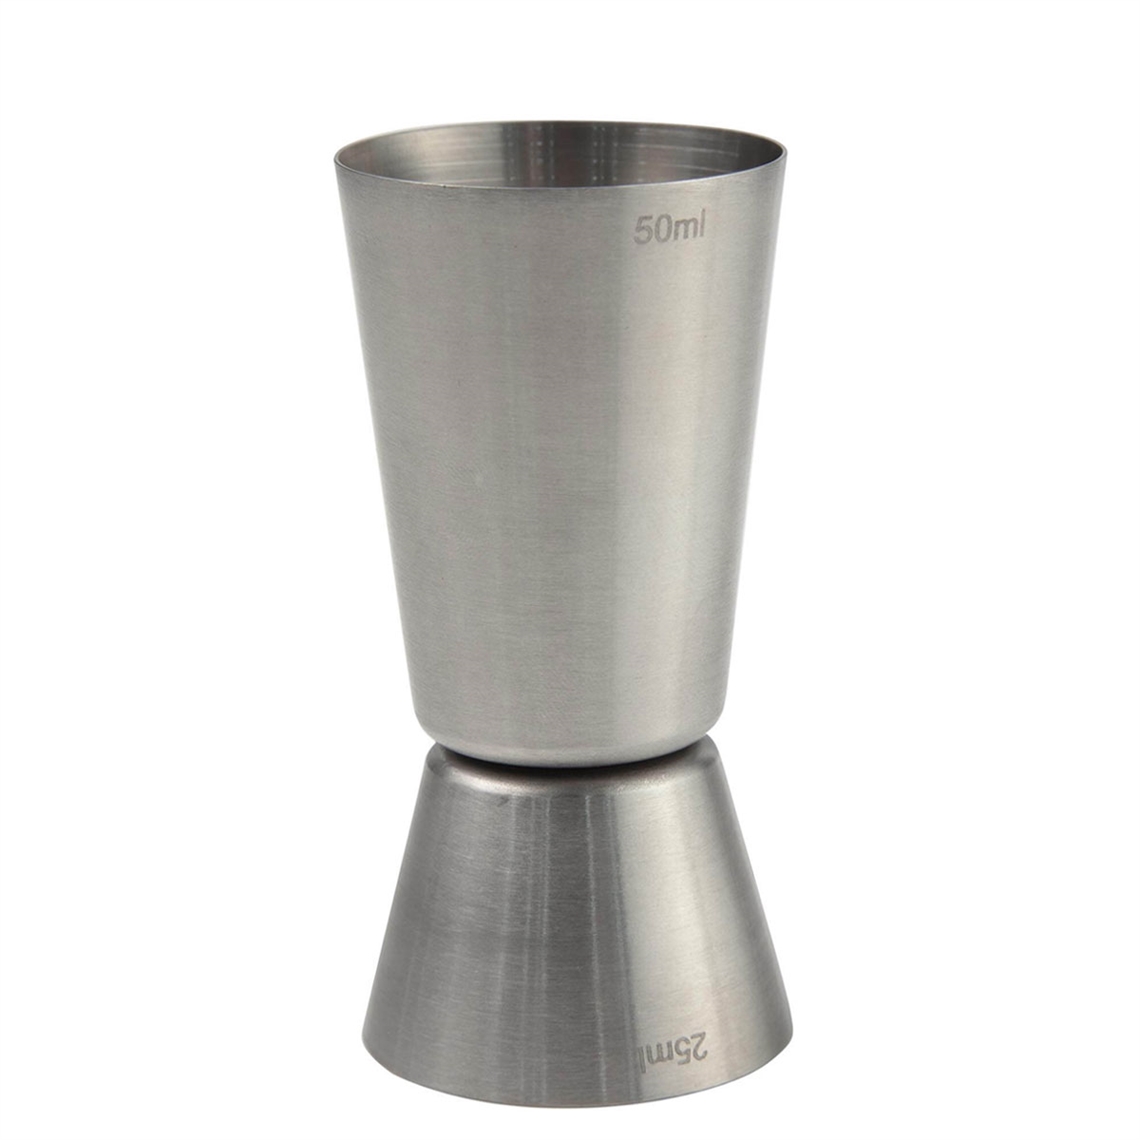 View more barware from our Spirit and Wine Bar Thimble Measures range